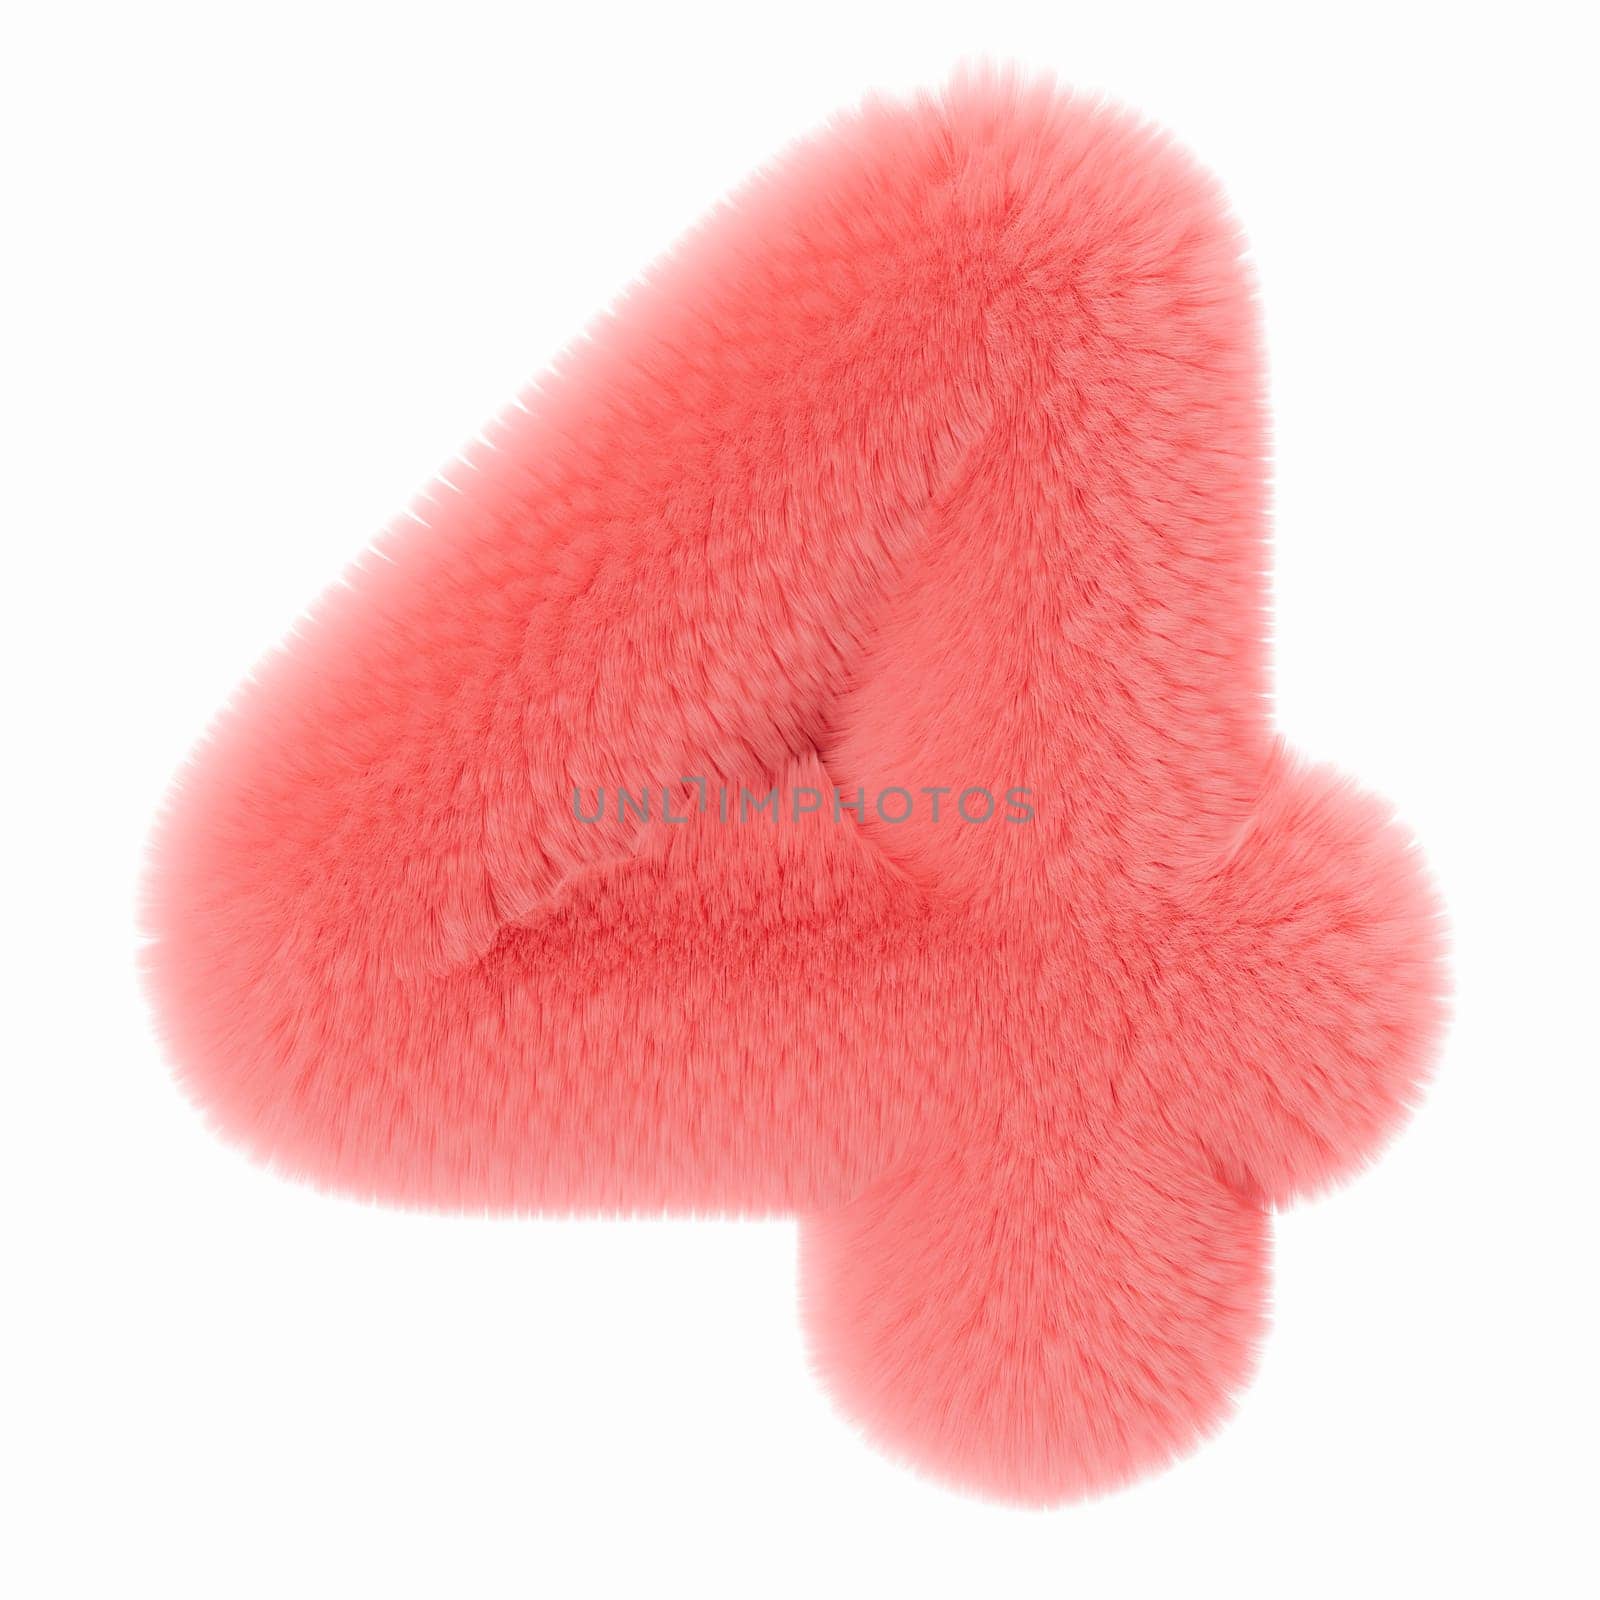 Pink and fluffy 3D number four, isolated on white background. Furry, soft and hairy symbol 4. Trendy, cute design element. Cut out object. 3D rendering. by creativebird